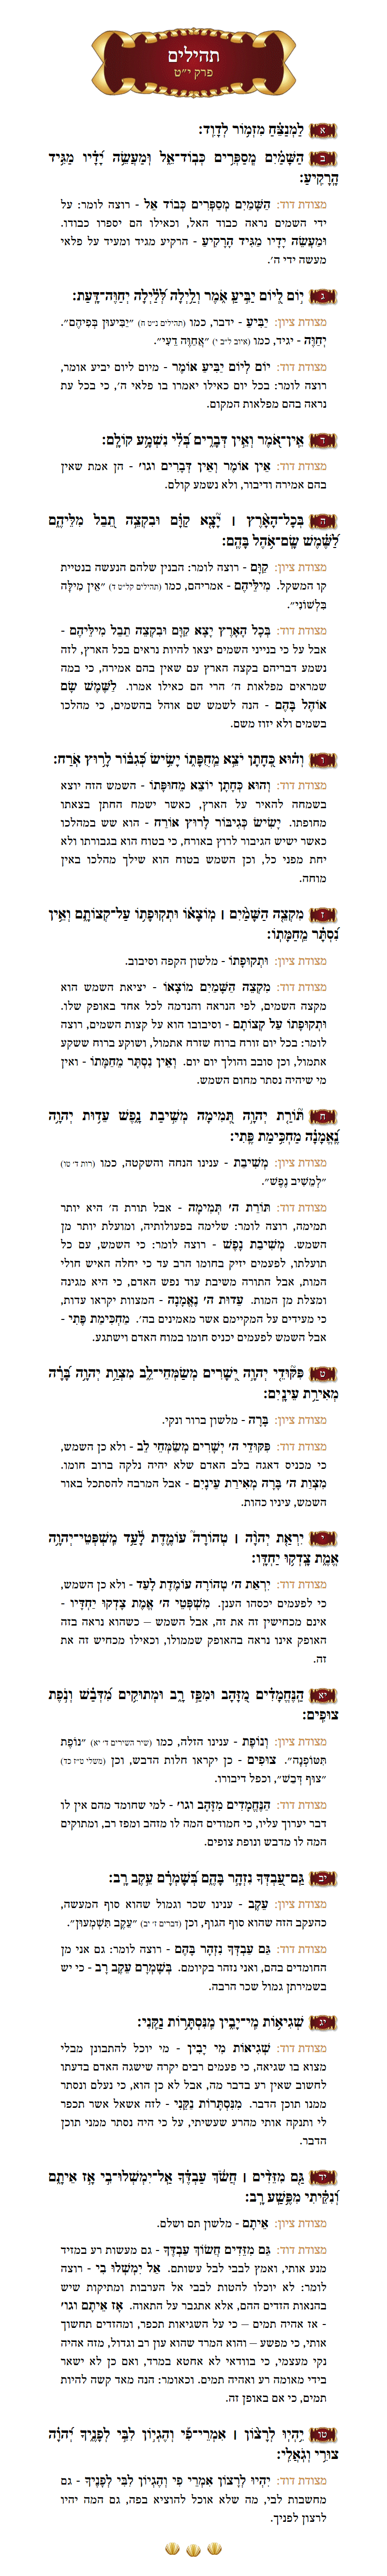 Sefer Tehillim Chapter 91 with commentary